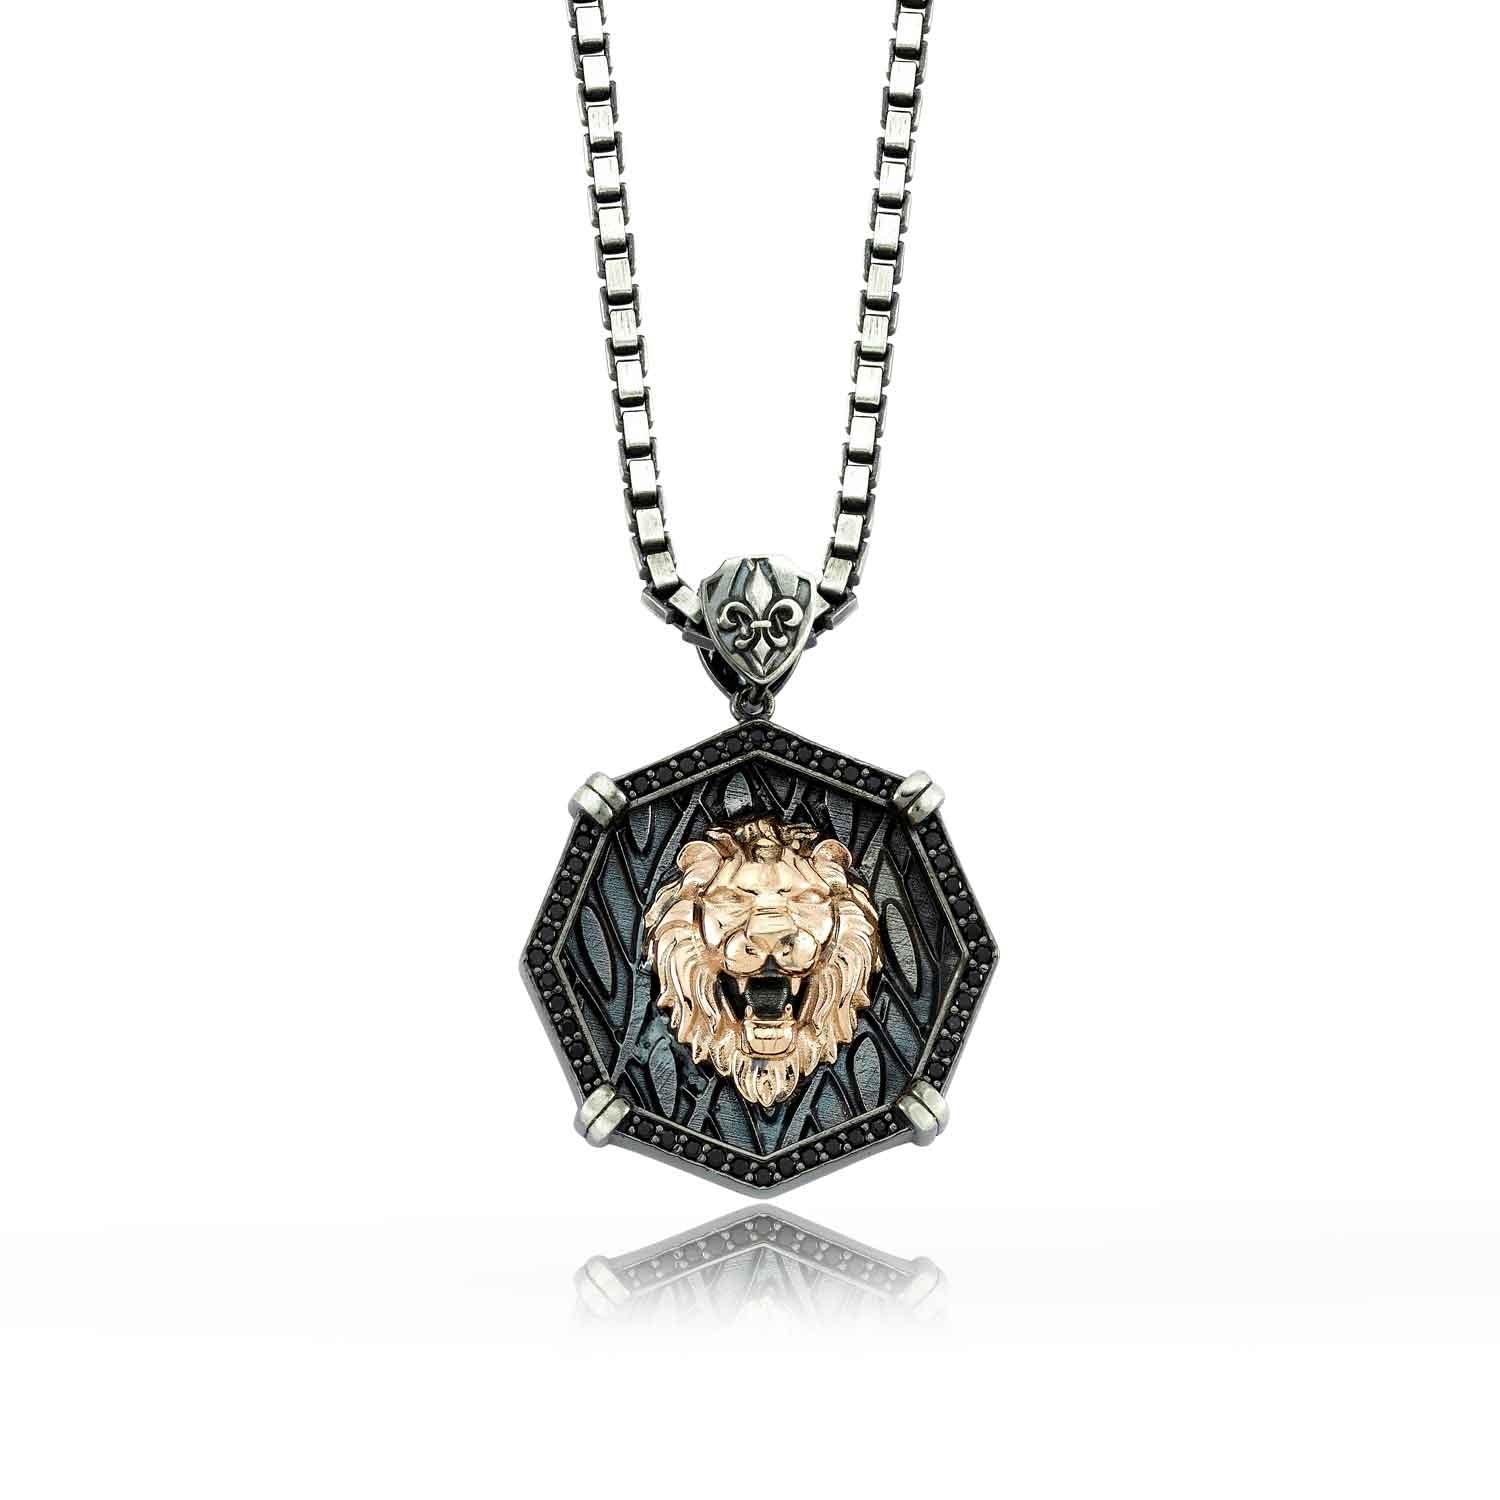 RARE PRINCE by CARAT SUTRA | Unique Designed Lion Pendant for Men | 925 Sterling Silver Rosegold Plated Oxidized Pendant | Men's Jewelry | With Certificate of Authenticity and 925 Hallmark - caratsutra